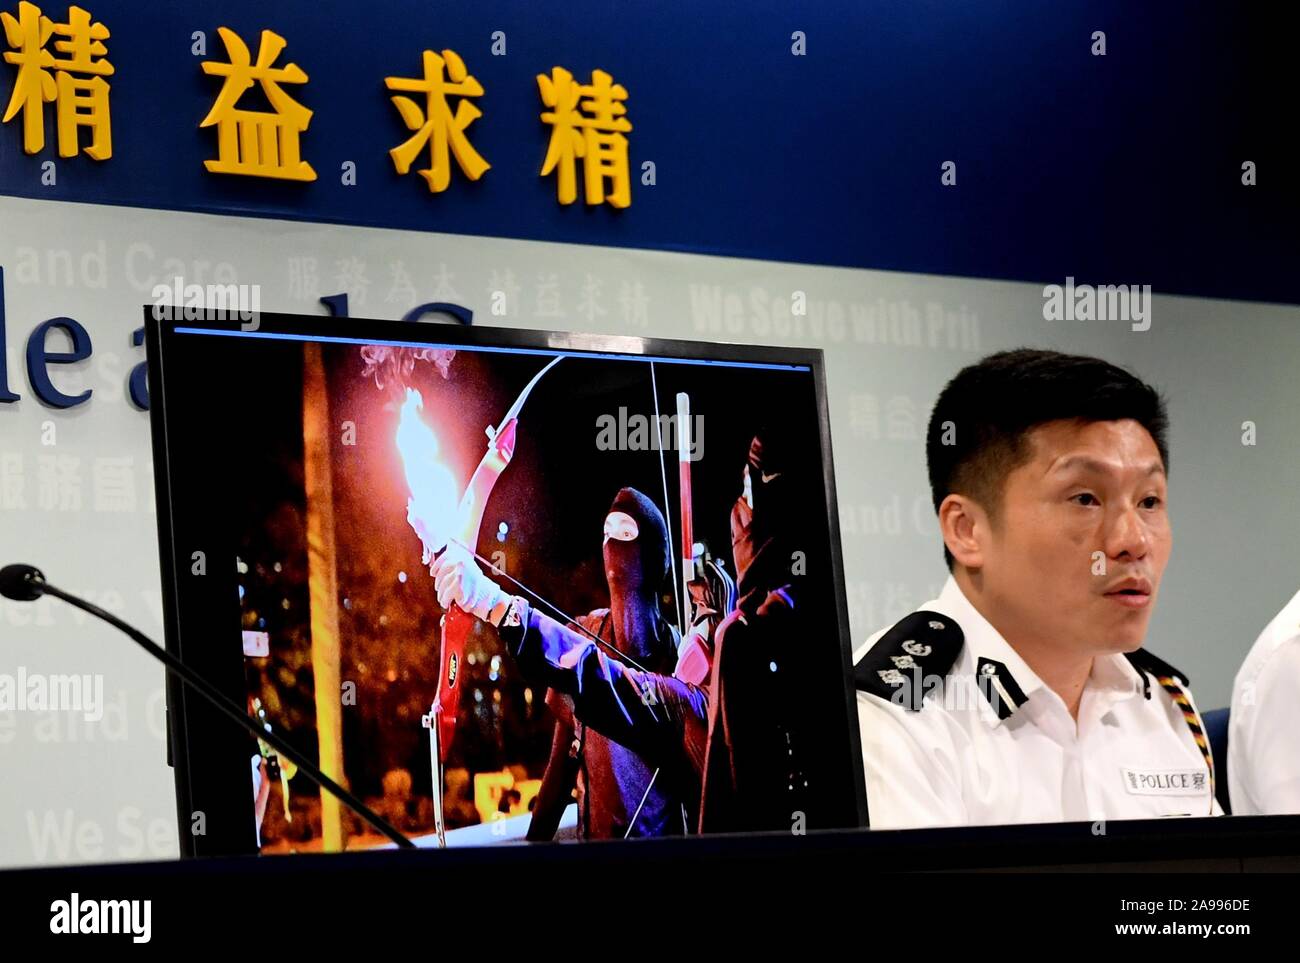 Hong Kong, China. 13th Nov, 2019. Chief Superintendent of Police Public Relations Branch Tse Chun-chung shows an evidence image of violent acts by rioters at a press conference in Hong Kong, south China, Nov. 13, 2019. Universities in Hong Kong are by no means a lawless frontier, and the police are legally responsible for taking actions against any law-breaking activities, Tse Chun-chung said. Credit: Zhu Xiang/Xinhua/Alamy Live News Stock Photo